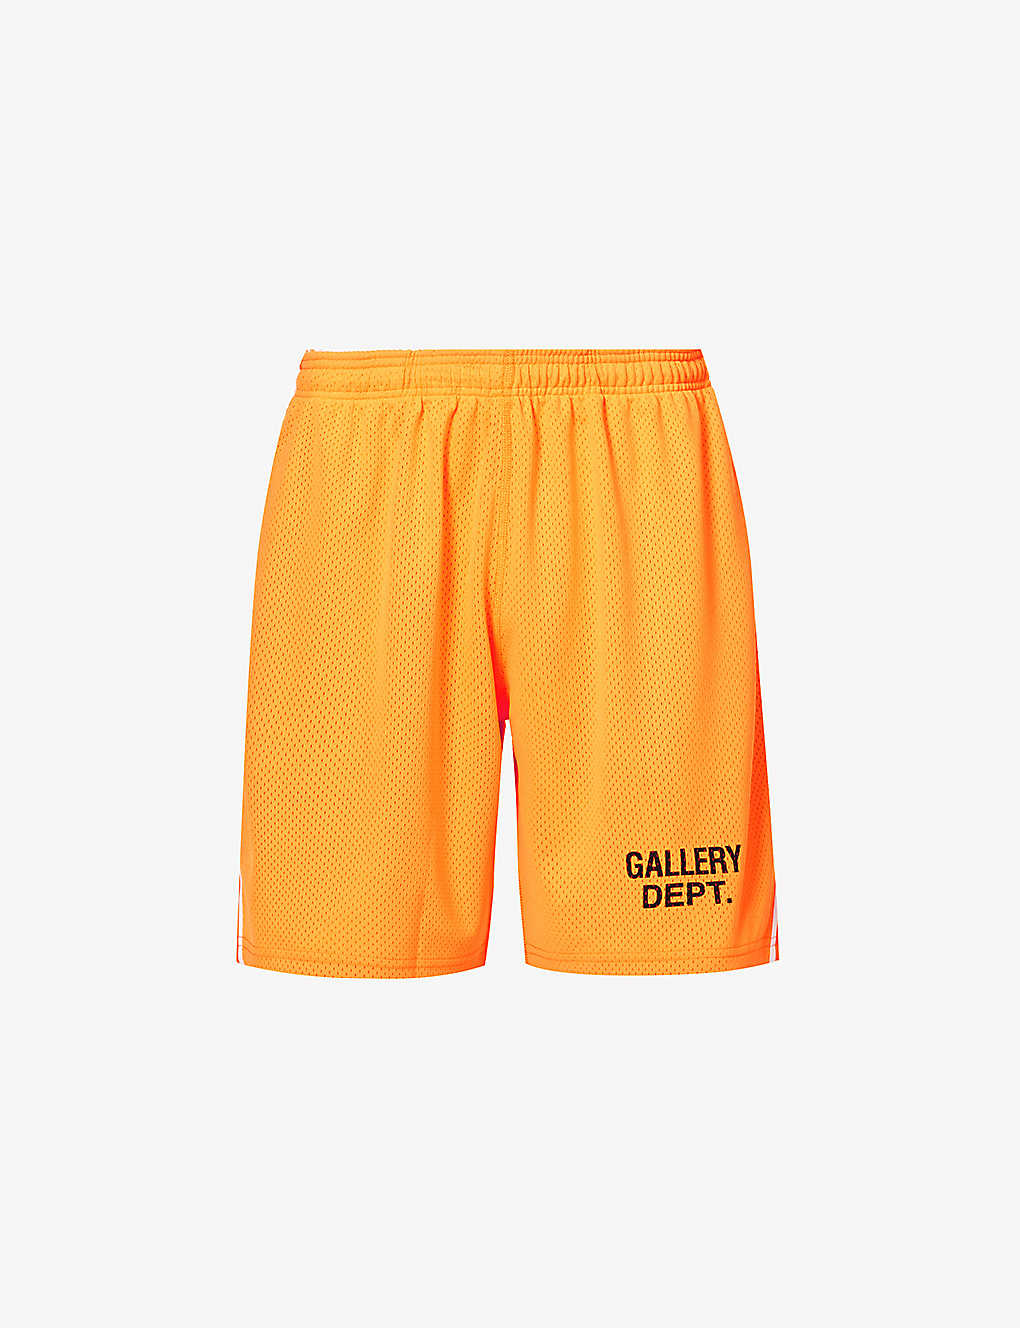 Gallery Dept. Sports Shorts In Gold